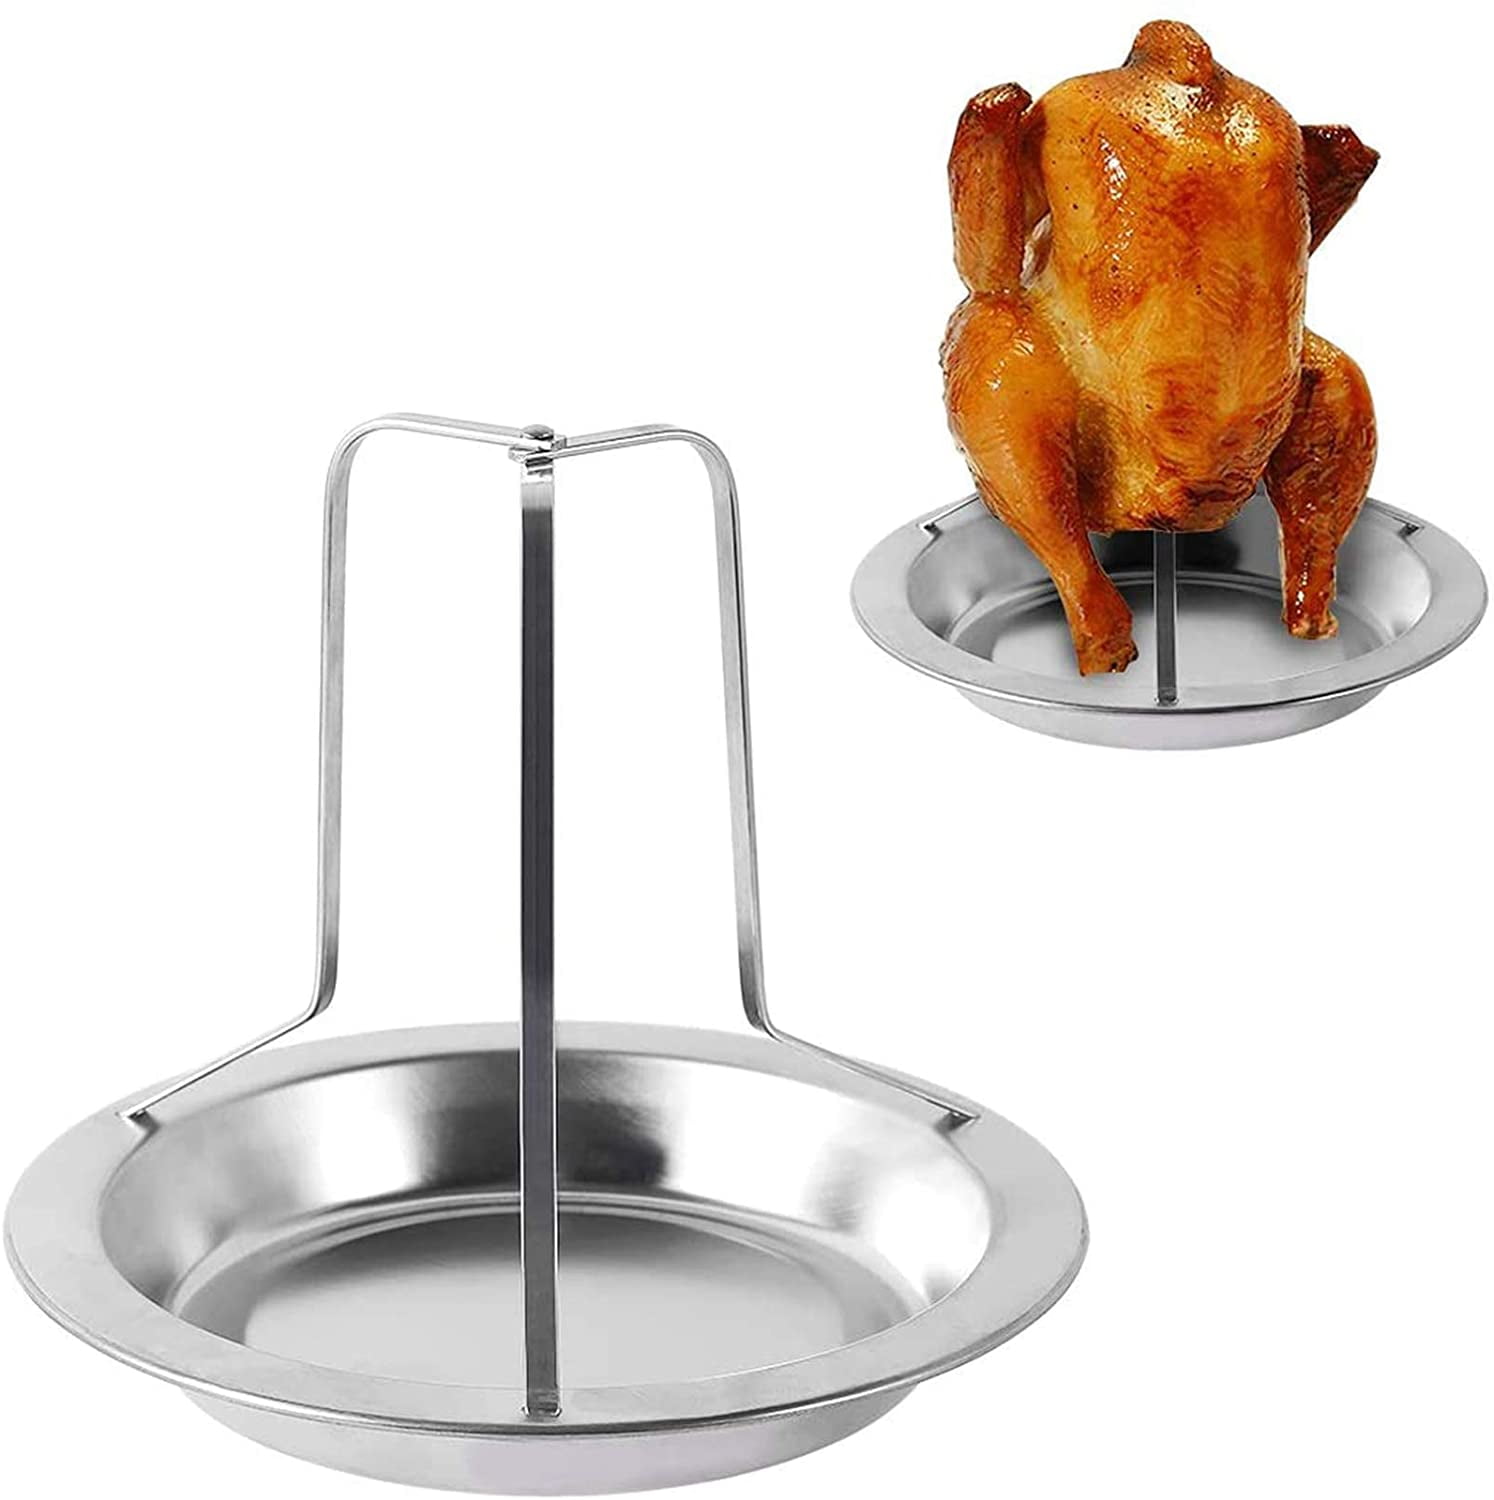 Oven or Smoker Barbecue Rack for The Grill Includes 4 Vegetable Spikes Dishwasher Safe Beer Can Chicken Roaster Stand Stainless Steel Holder